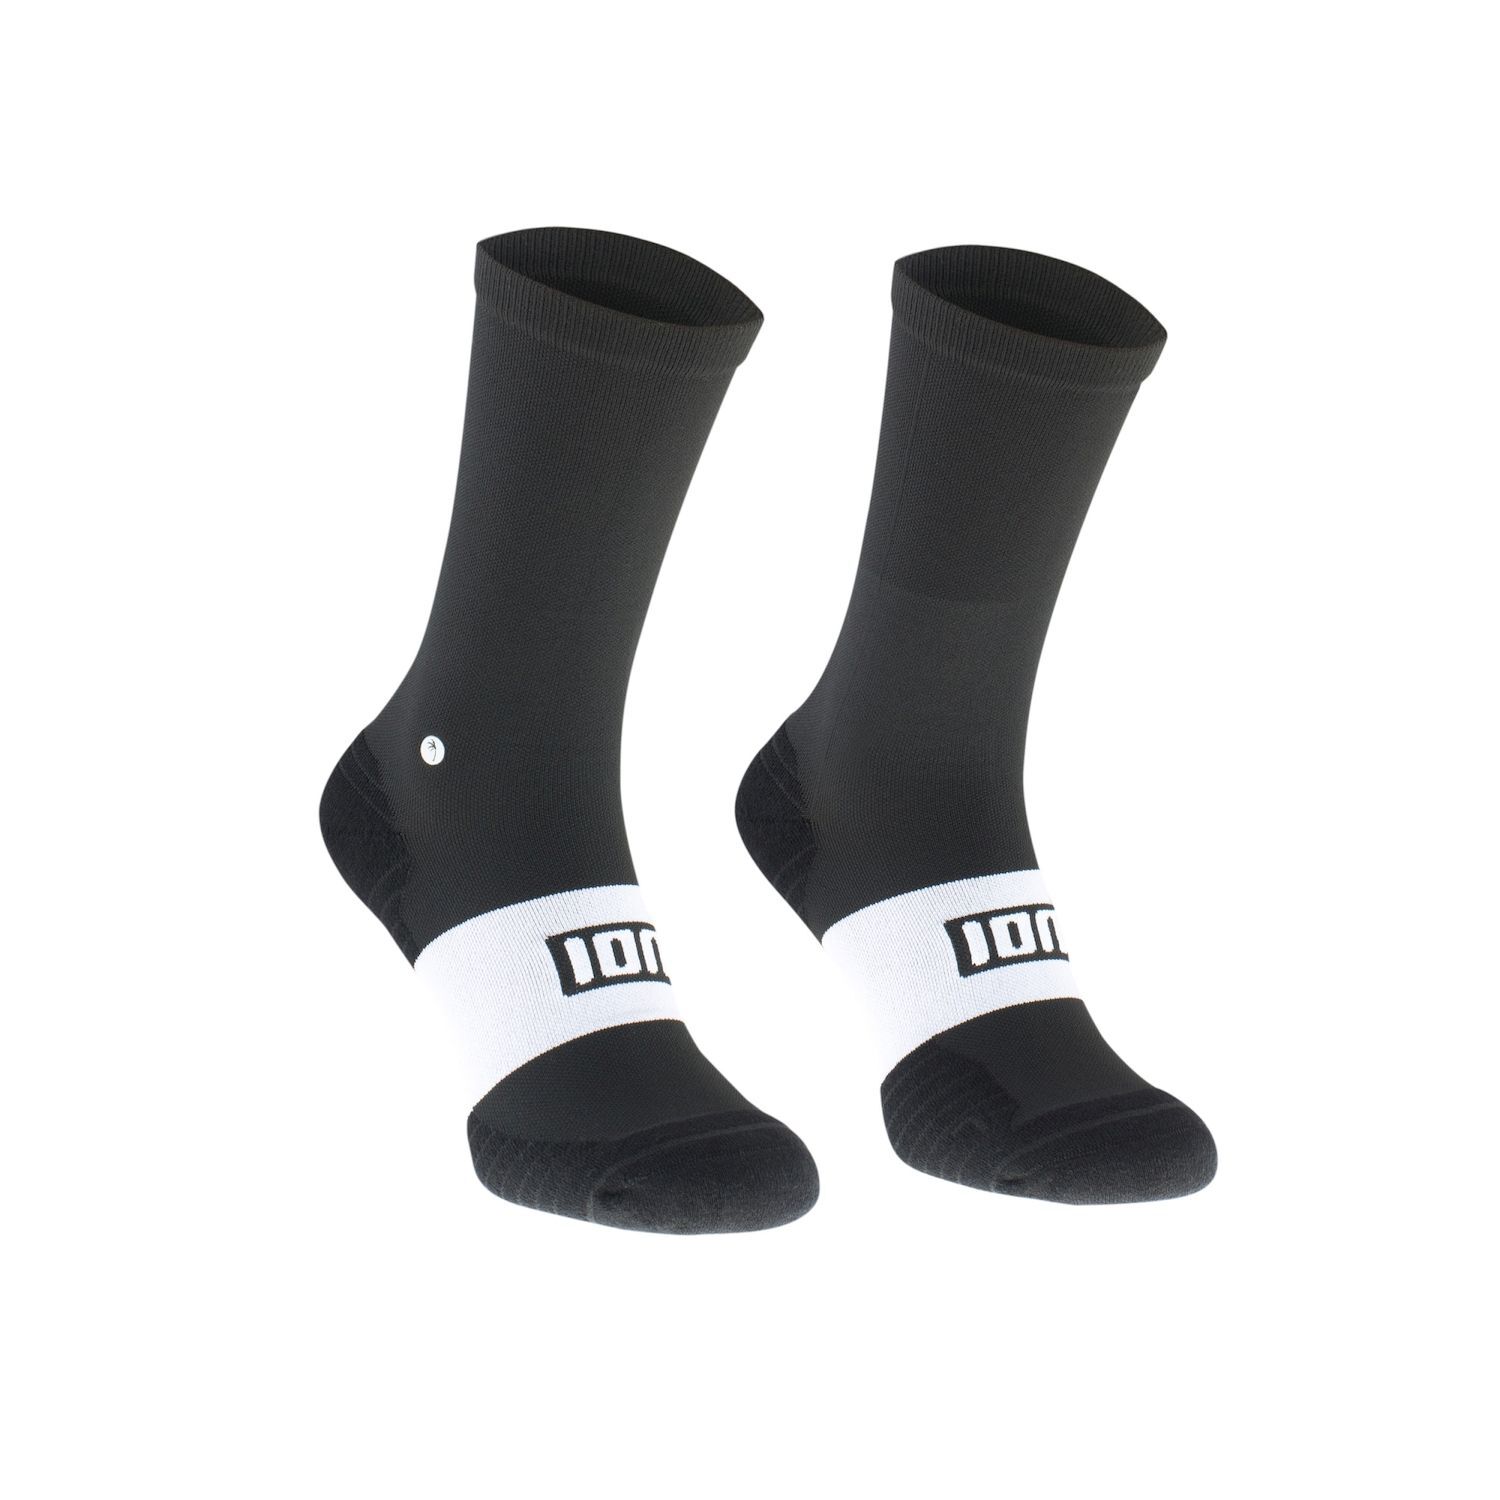 ION Socks short - Calcetines ciclismo